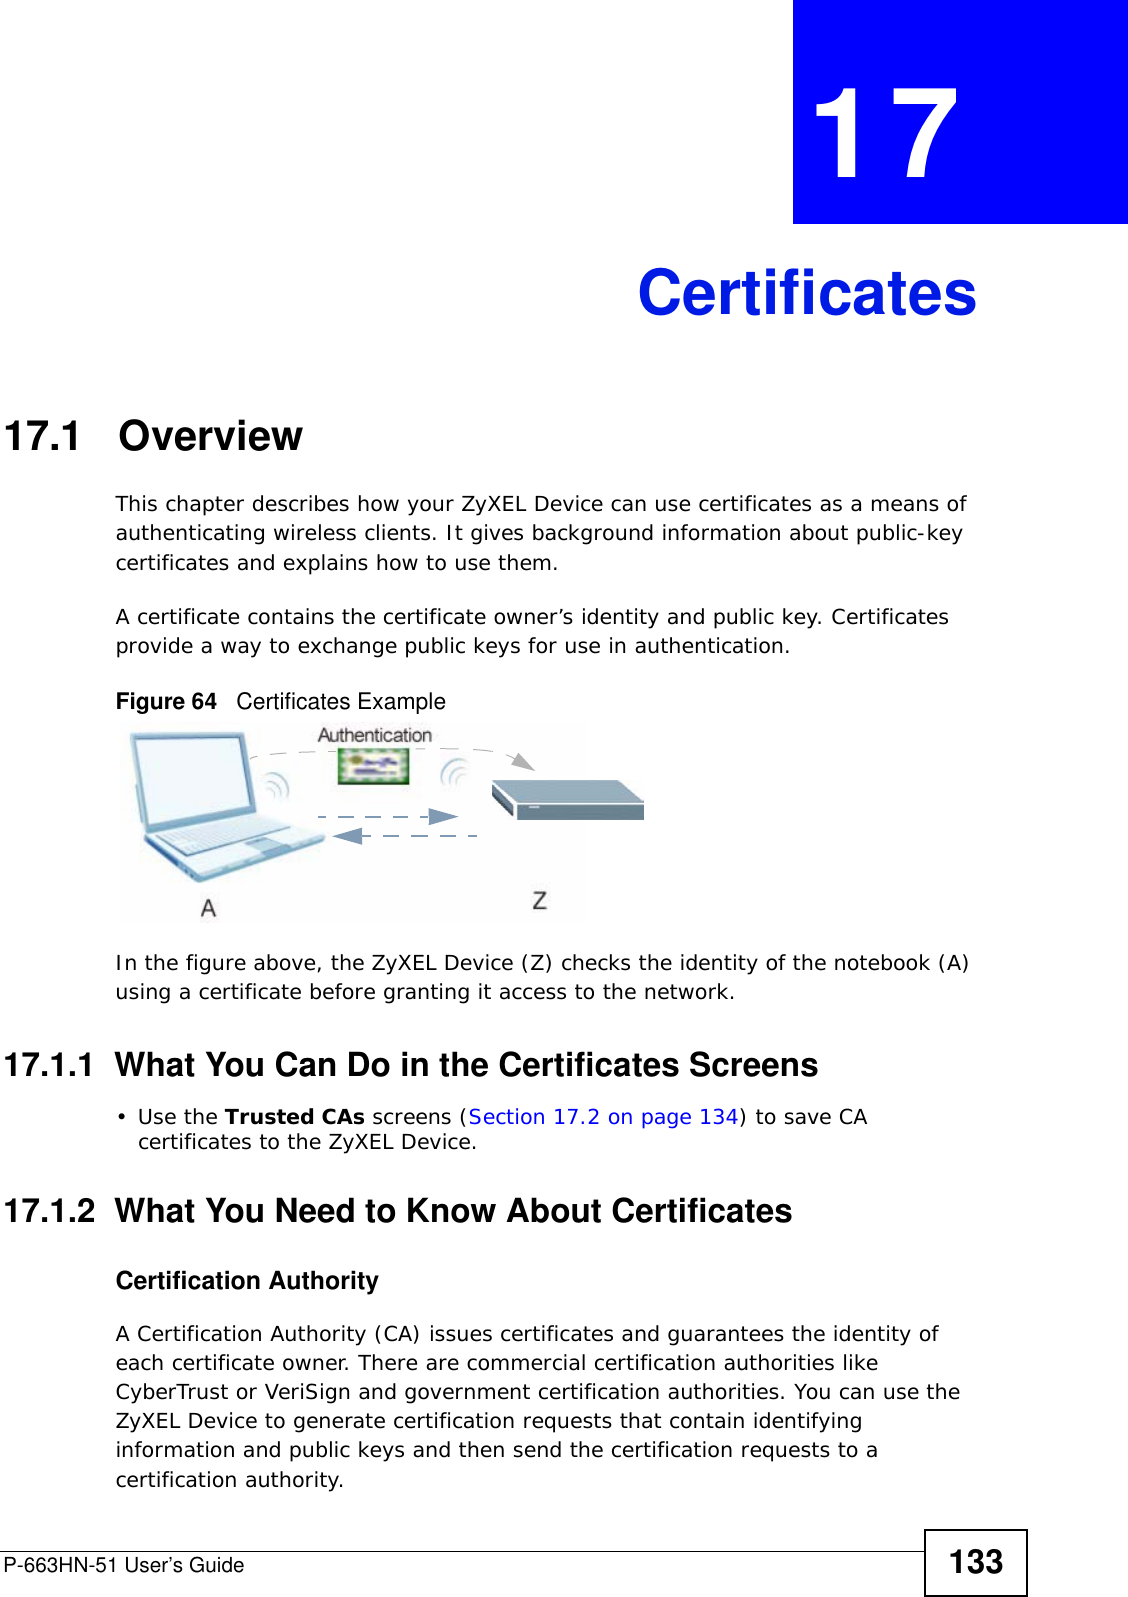 P-663HN-51 User’s Guide 133CHAPTER  17 Certificates17.1   OverviewThis chapter describes how your ZyXEL Device can use certificates as a means of authenticating wireless clients. It gives background information about public-key certificates and explains how to use them.A certificate contains the certificate owner’s identity and public key. Certificates provide a way to exchange public keys for use in authentication.Figure 64   Certificates ExampleIn the figure above, the ZyXEL Device (Z) checks the identity of the notebook (A) using a certificate before granting it access to the network.17.1.1  What You Can Do in the Certificates Screens•Use the Trusted CAs screens (Section 17.2 on page 134) to save CA certificates to the ZyXEL Device.17.1.2  What You Need to Know About CertificatesCertification AuthorityA Certification Authority (CA) issues certificates and guarantees the identity of each certificate owner. There are commercial certification authorities like CyberTrust or VeriSign and government certification authorities. You can use the ZyXEL Device to generate certification requests that contain identifying information and public keys and then send the certification requests to a certification authority.